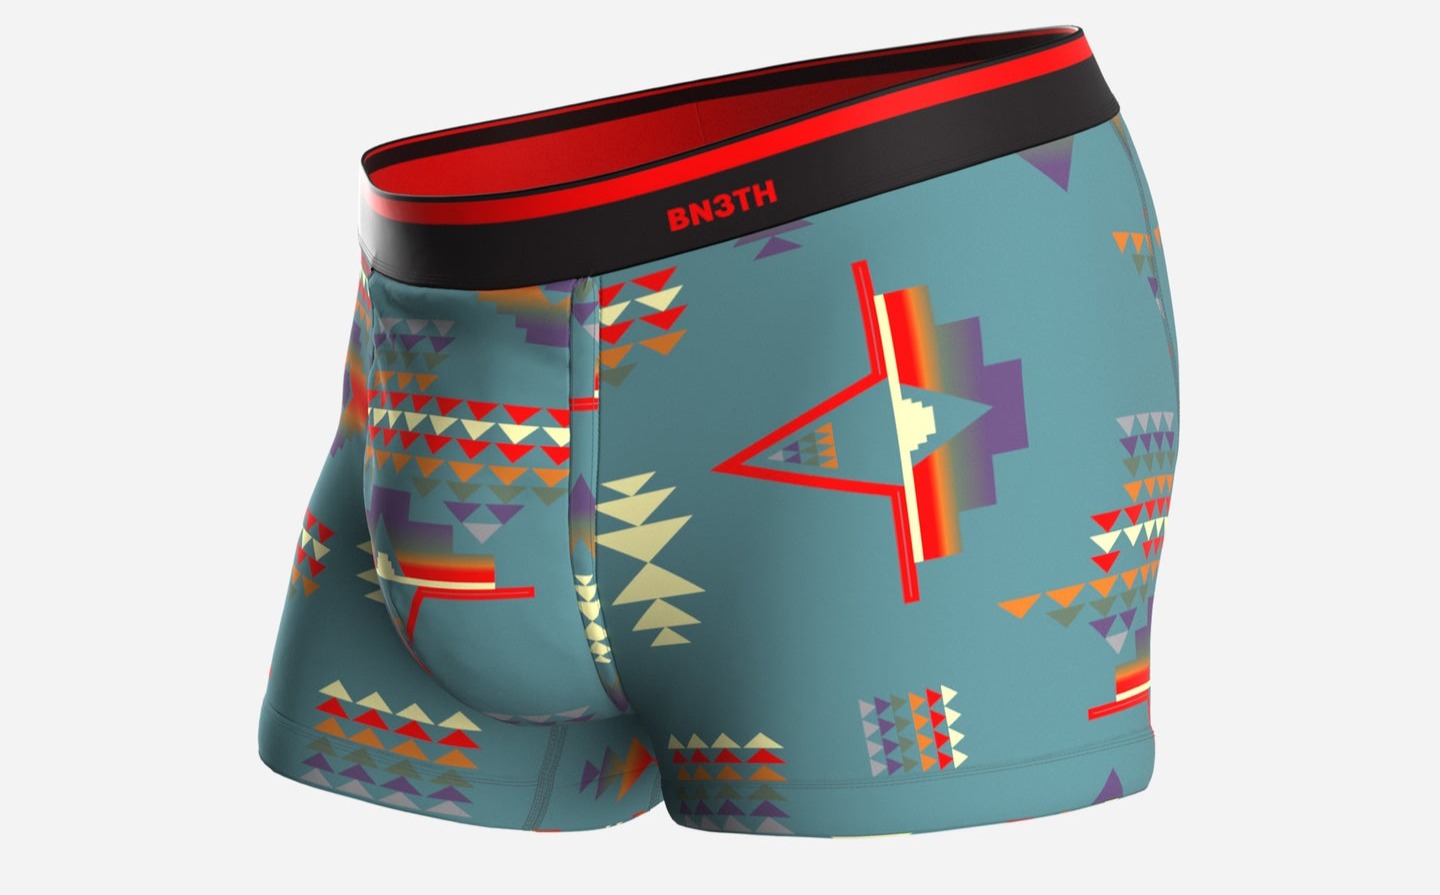 MyPakage Action Series Boxer Brief - Men's - Clothing